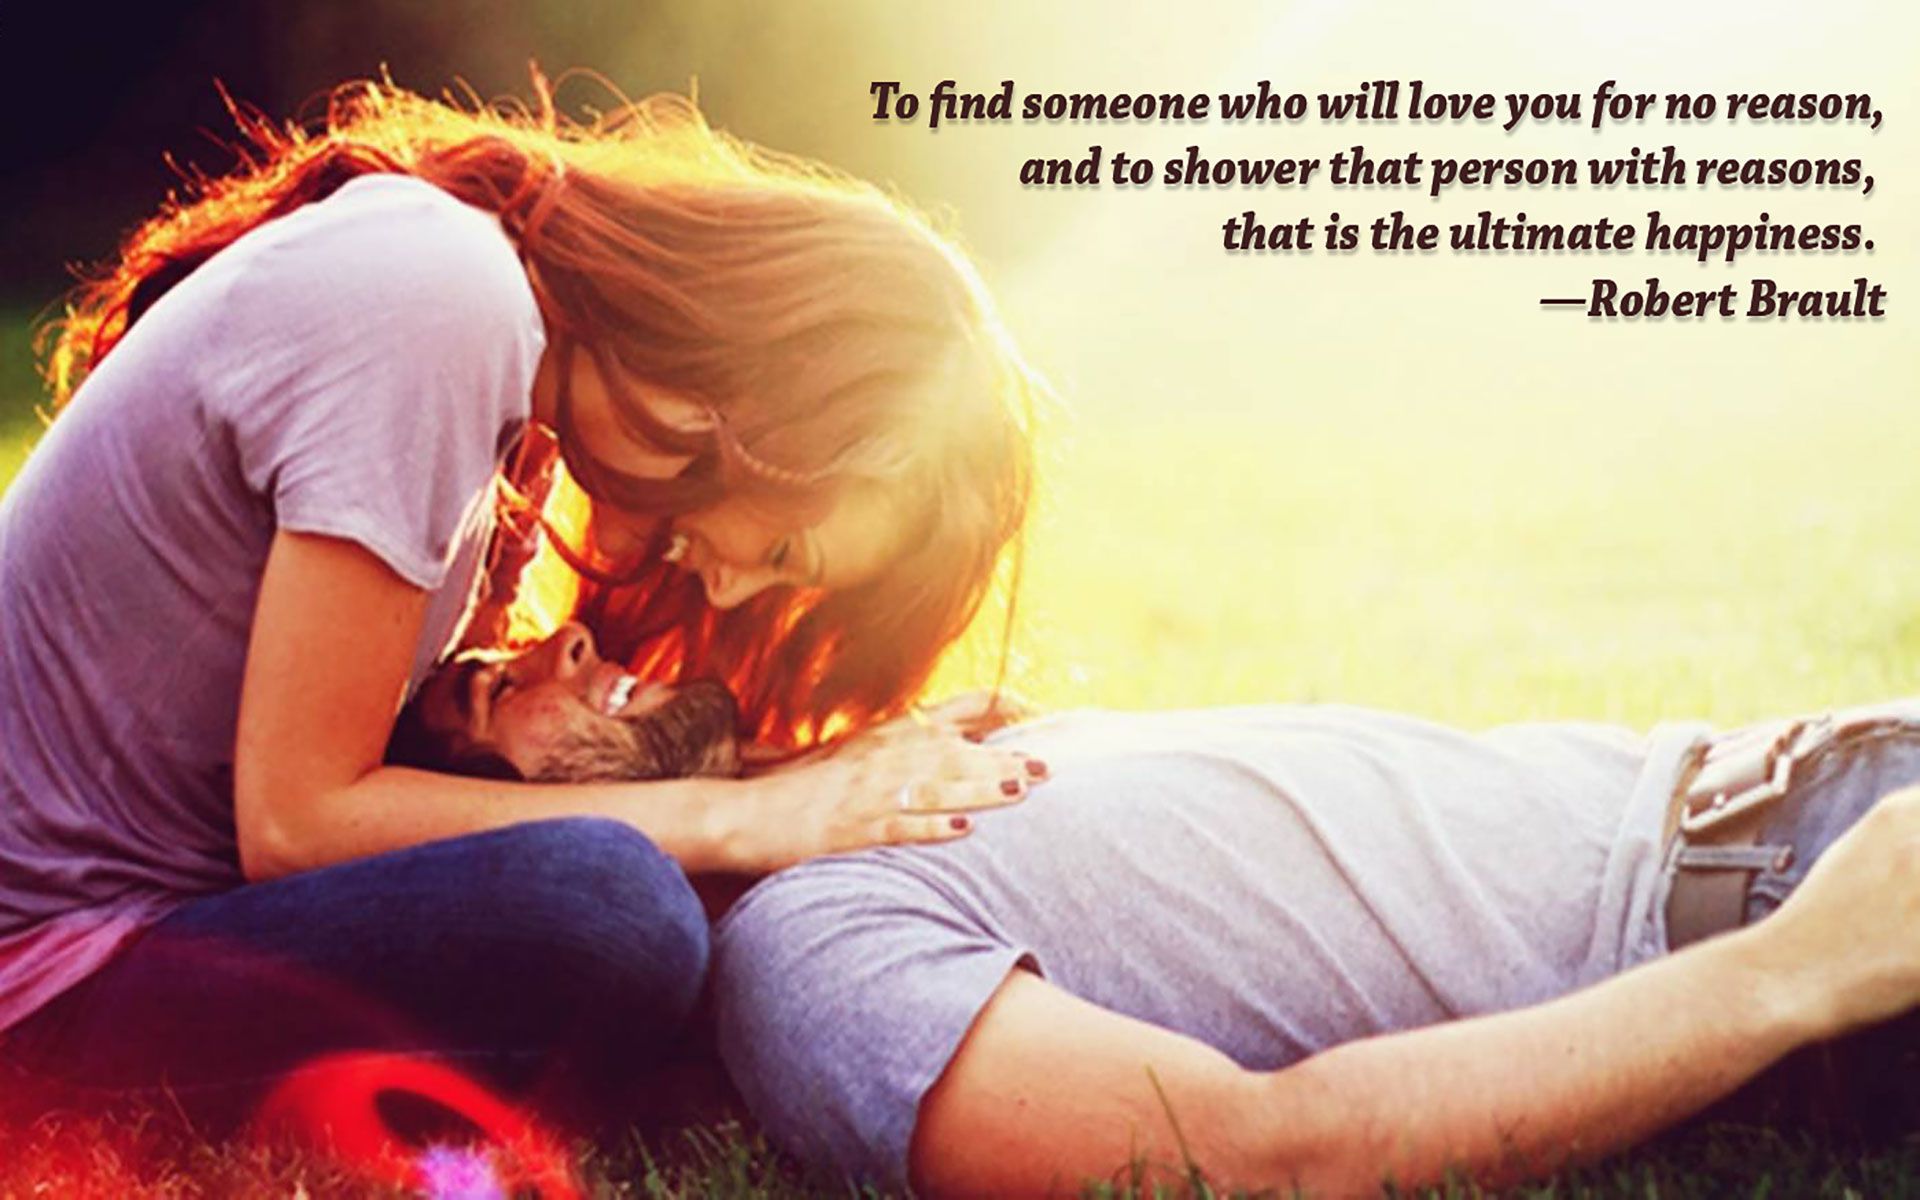 20+ Love Quotes Wallpaper -Romantic Couple Images with Quotes